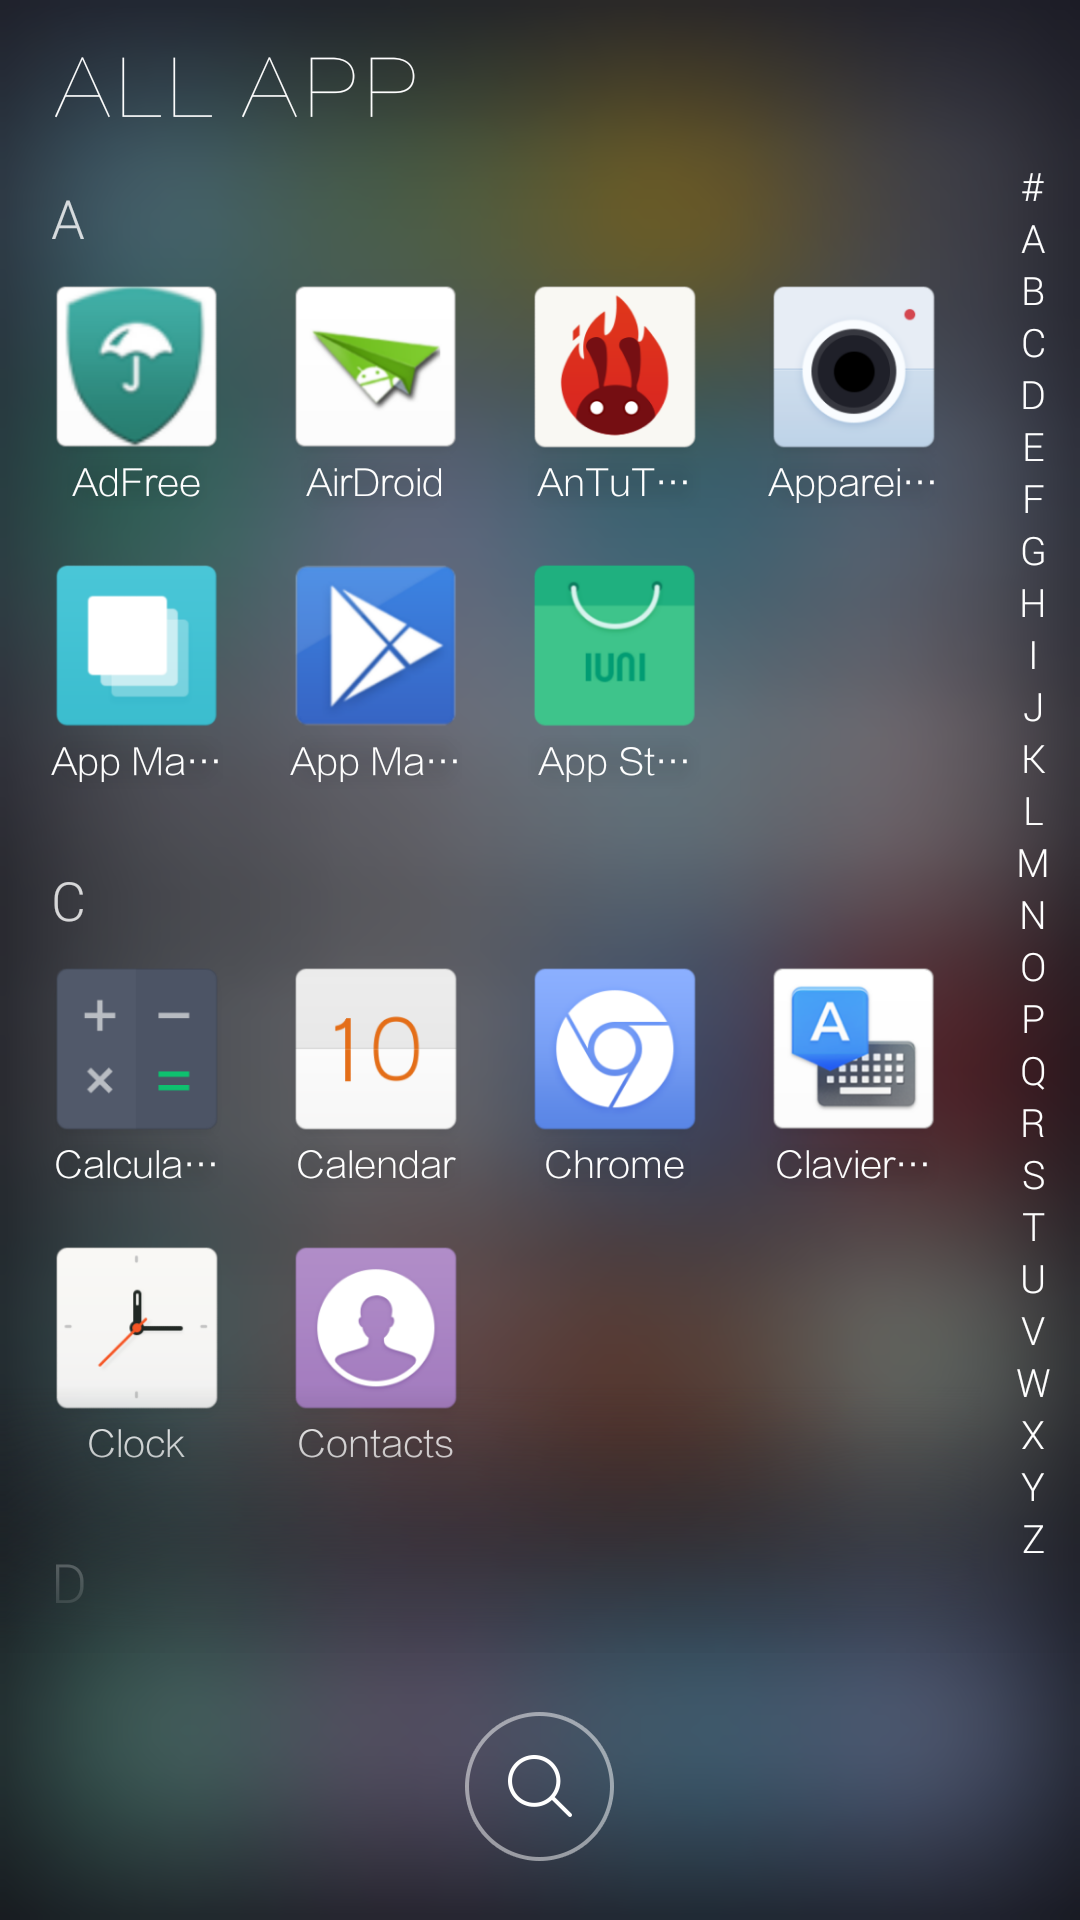 iuniOS -drawer droit all apps